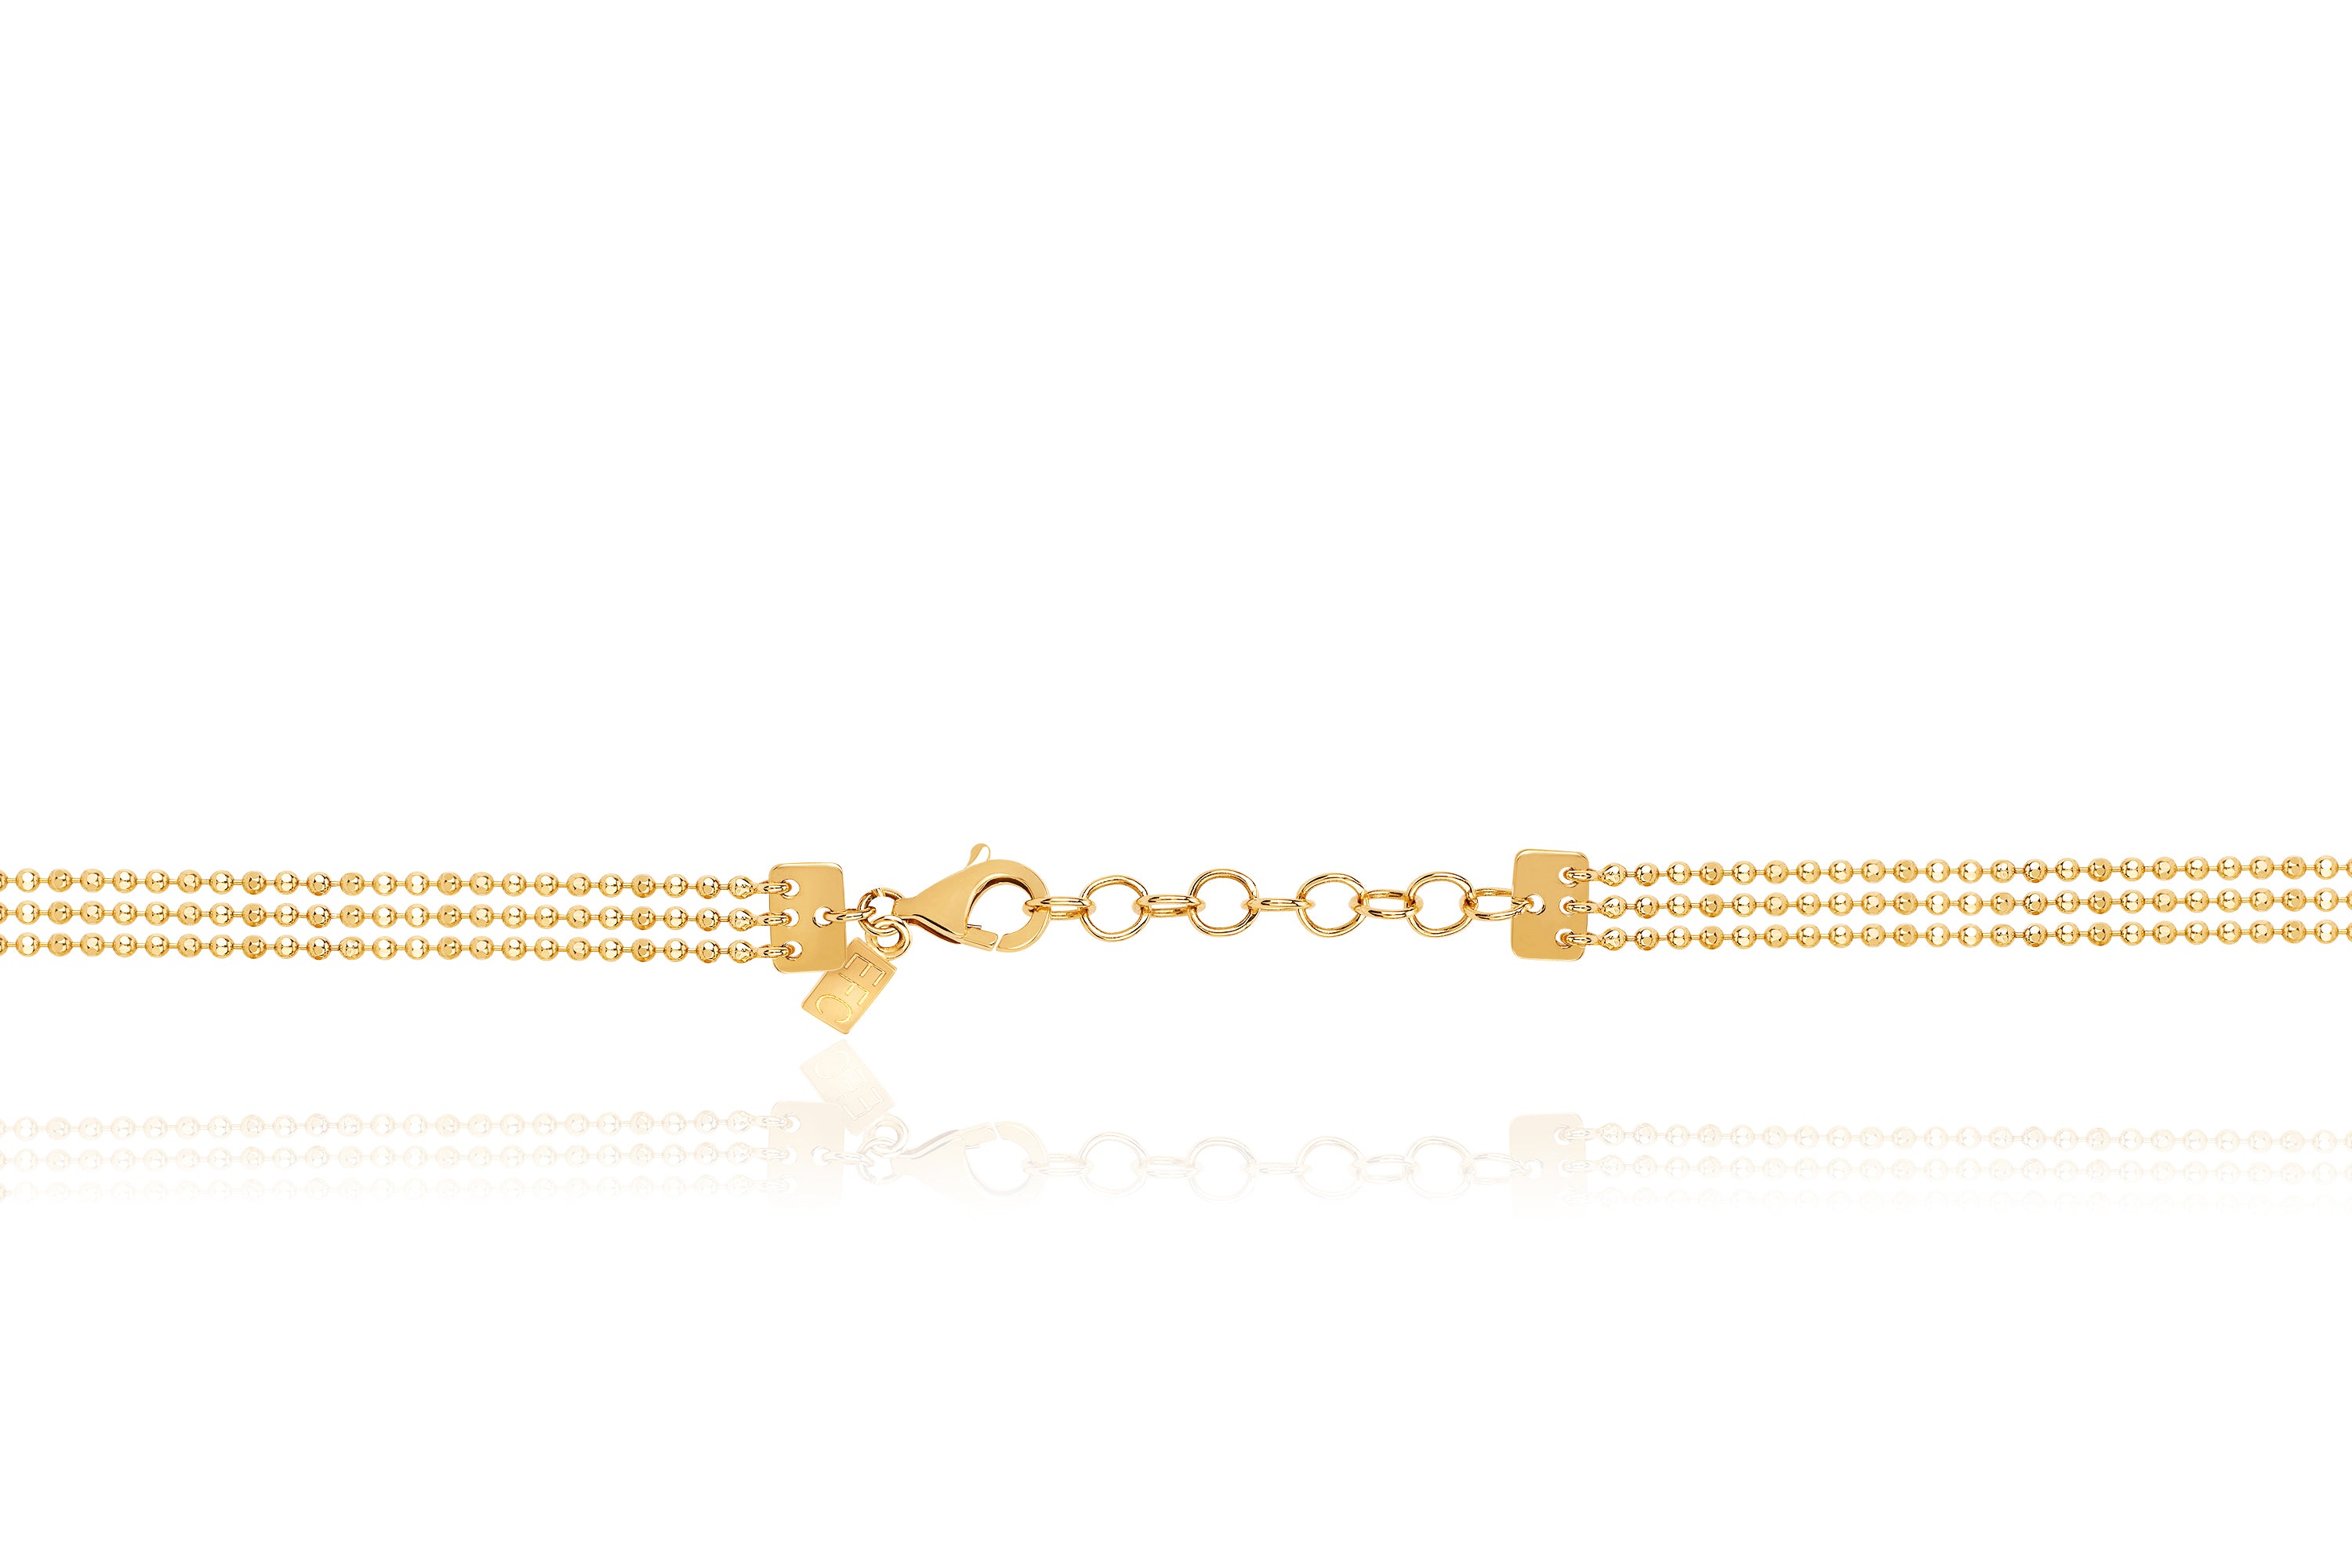 Hasson Triple Layered Chain Necklace